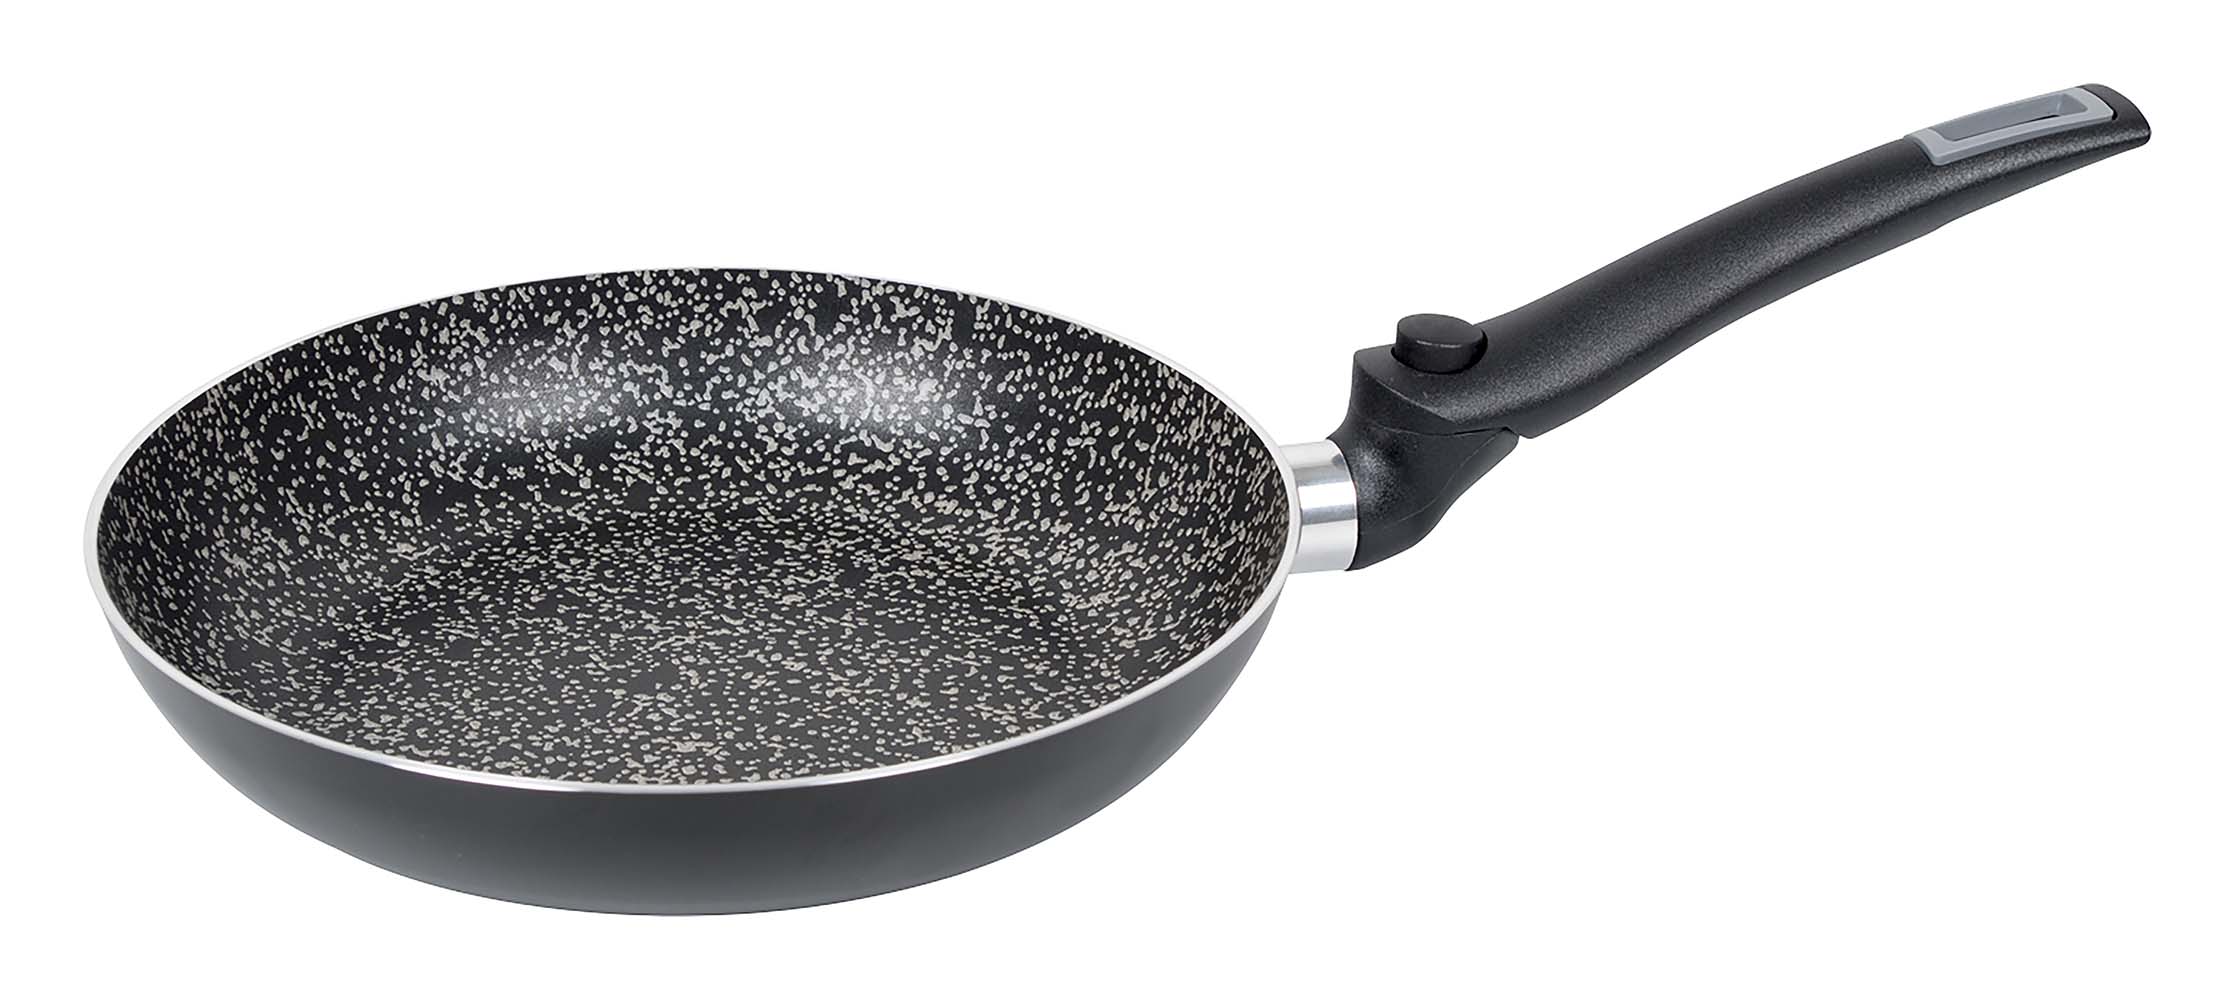 2304428 An aluminium frying pan with foldaway handle. Comes with a 5 layer Salus Stone coating and an anti-slip base. This pan has a foldaway handle and therefore makes good use of space and is easy to take with you. Thickness: 2.5 millimetres.